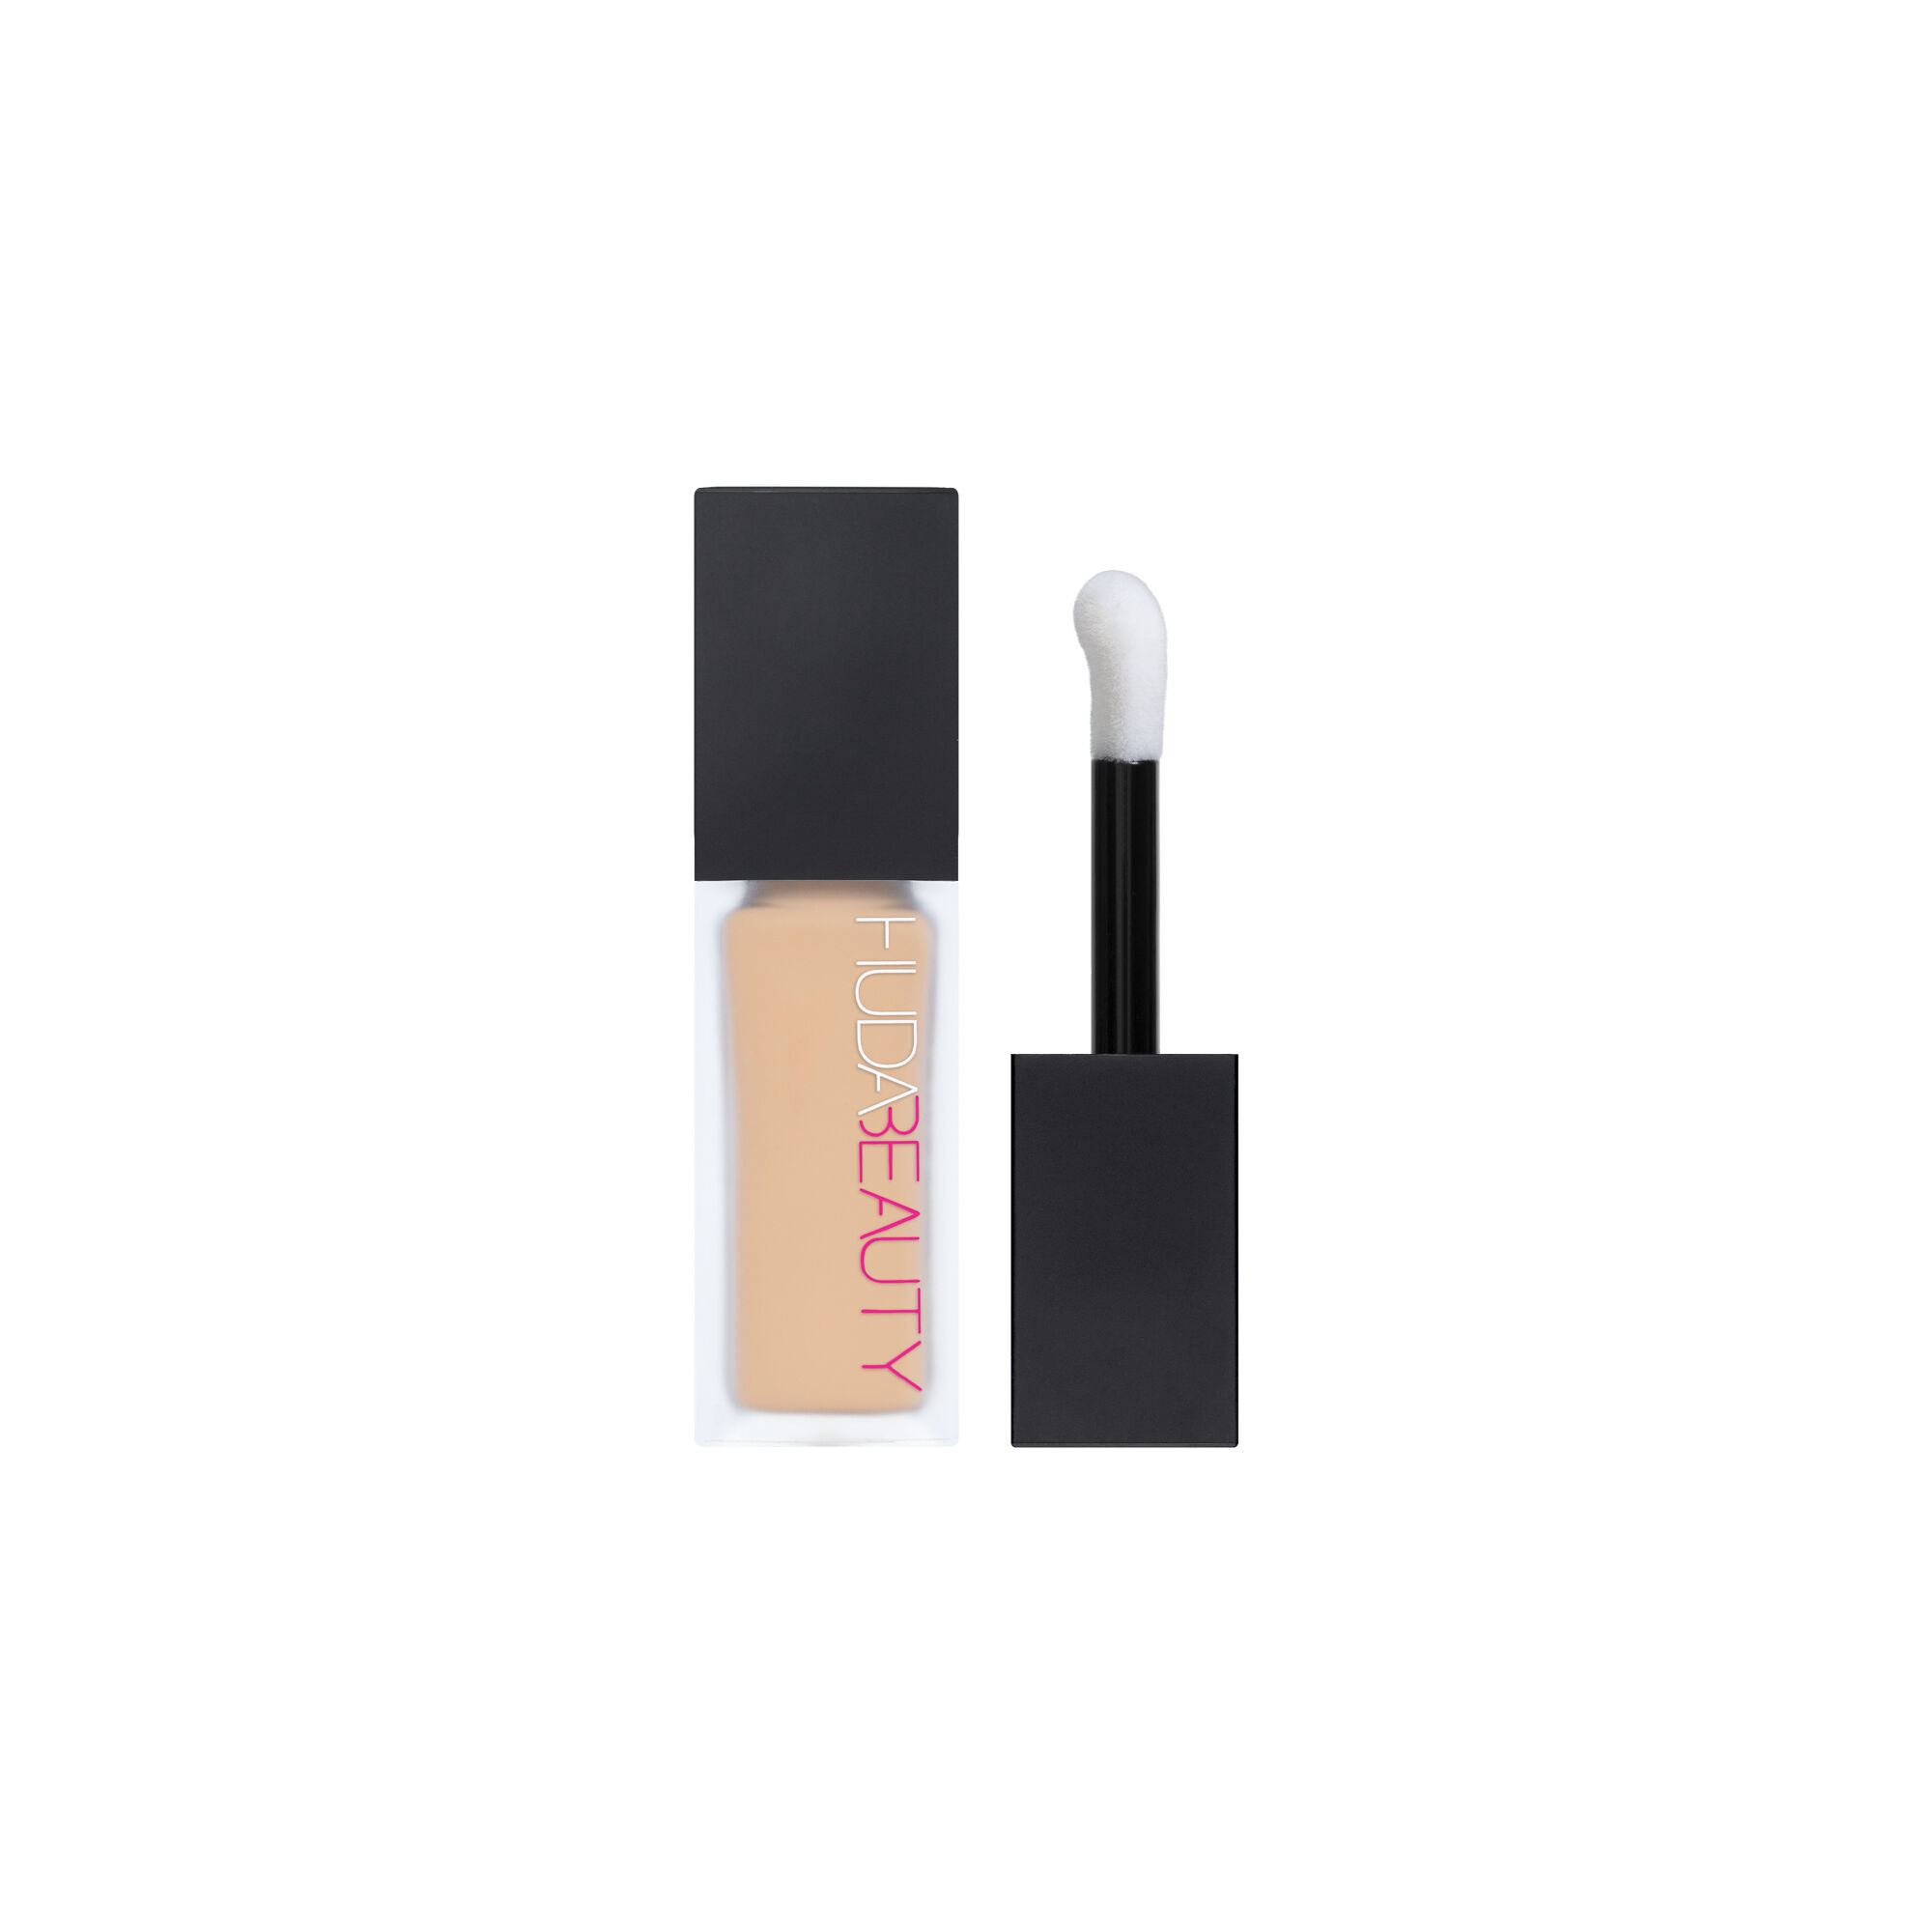 Huda Beauty Faux Filter Concealer Cotton Candy 2.3 In Cotton Candy 2.3b